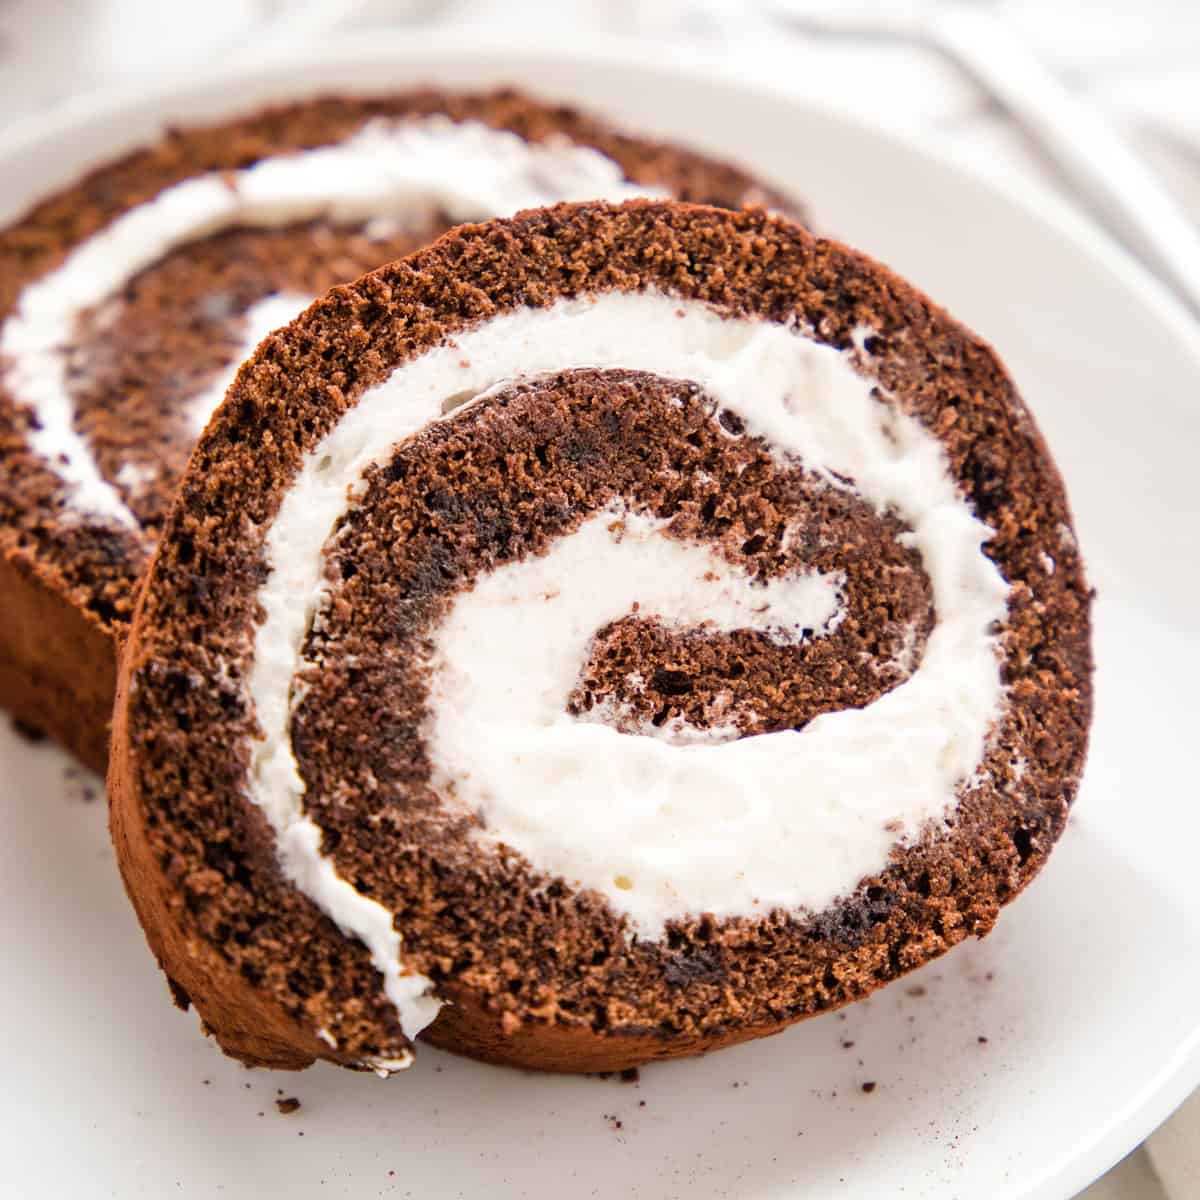 Chocolate Swiss Roll Recipe - The Flavor Bender